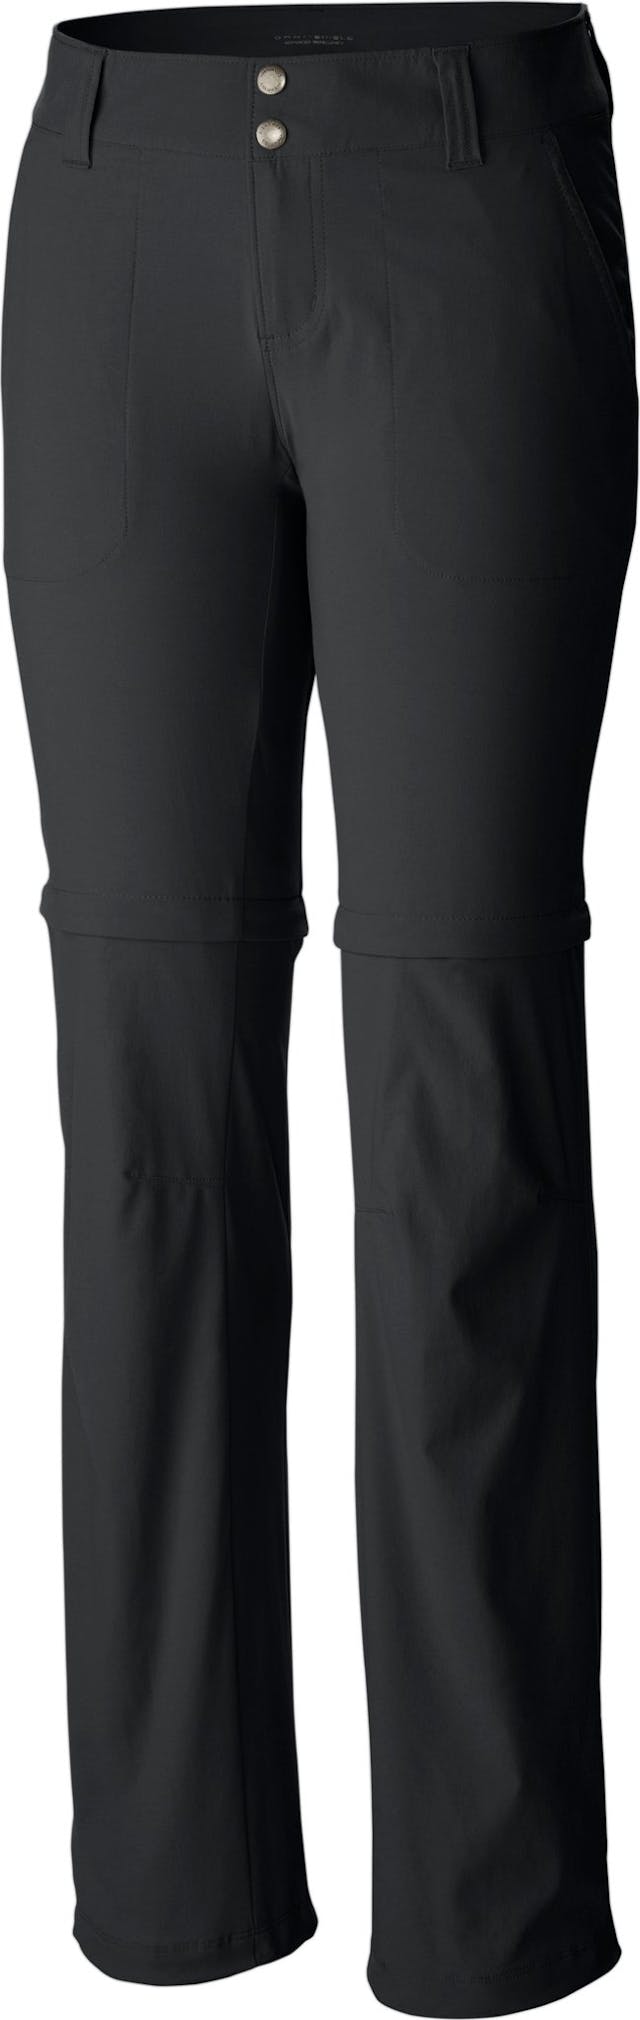 Product image for Saturday Trail II Convertible Pant - Women's